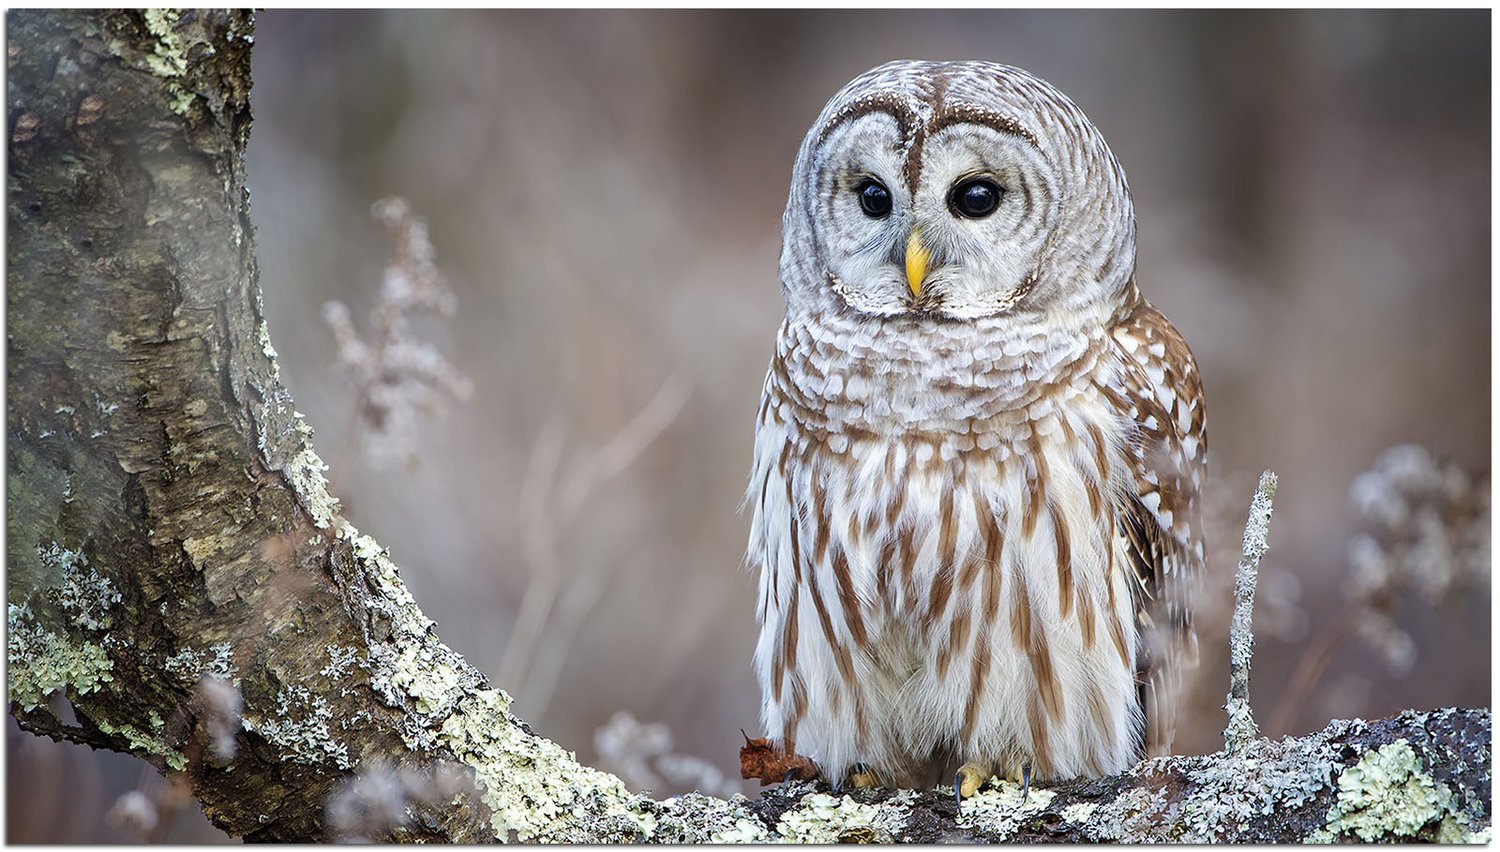 Close up of a barred owl perched on a tree branch.